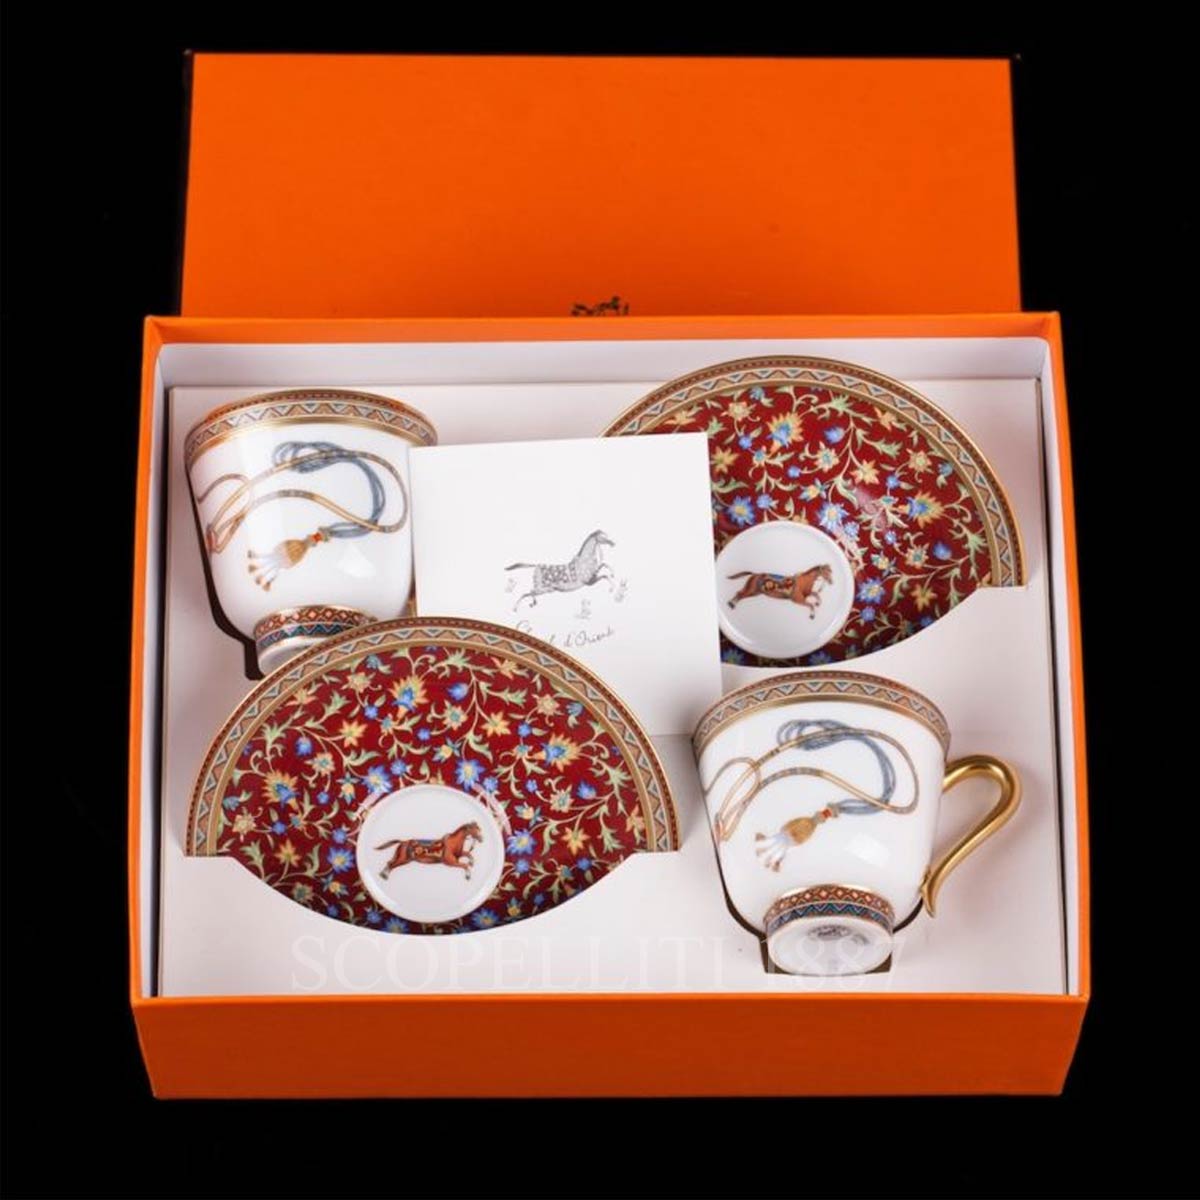 Hermes Cheval d'Orient Tea Cup and Saucer no.4 - Set of 2